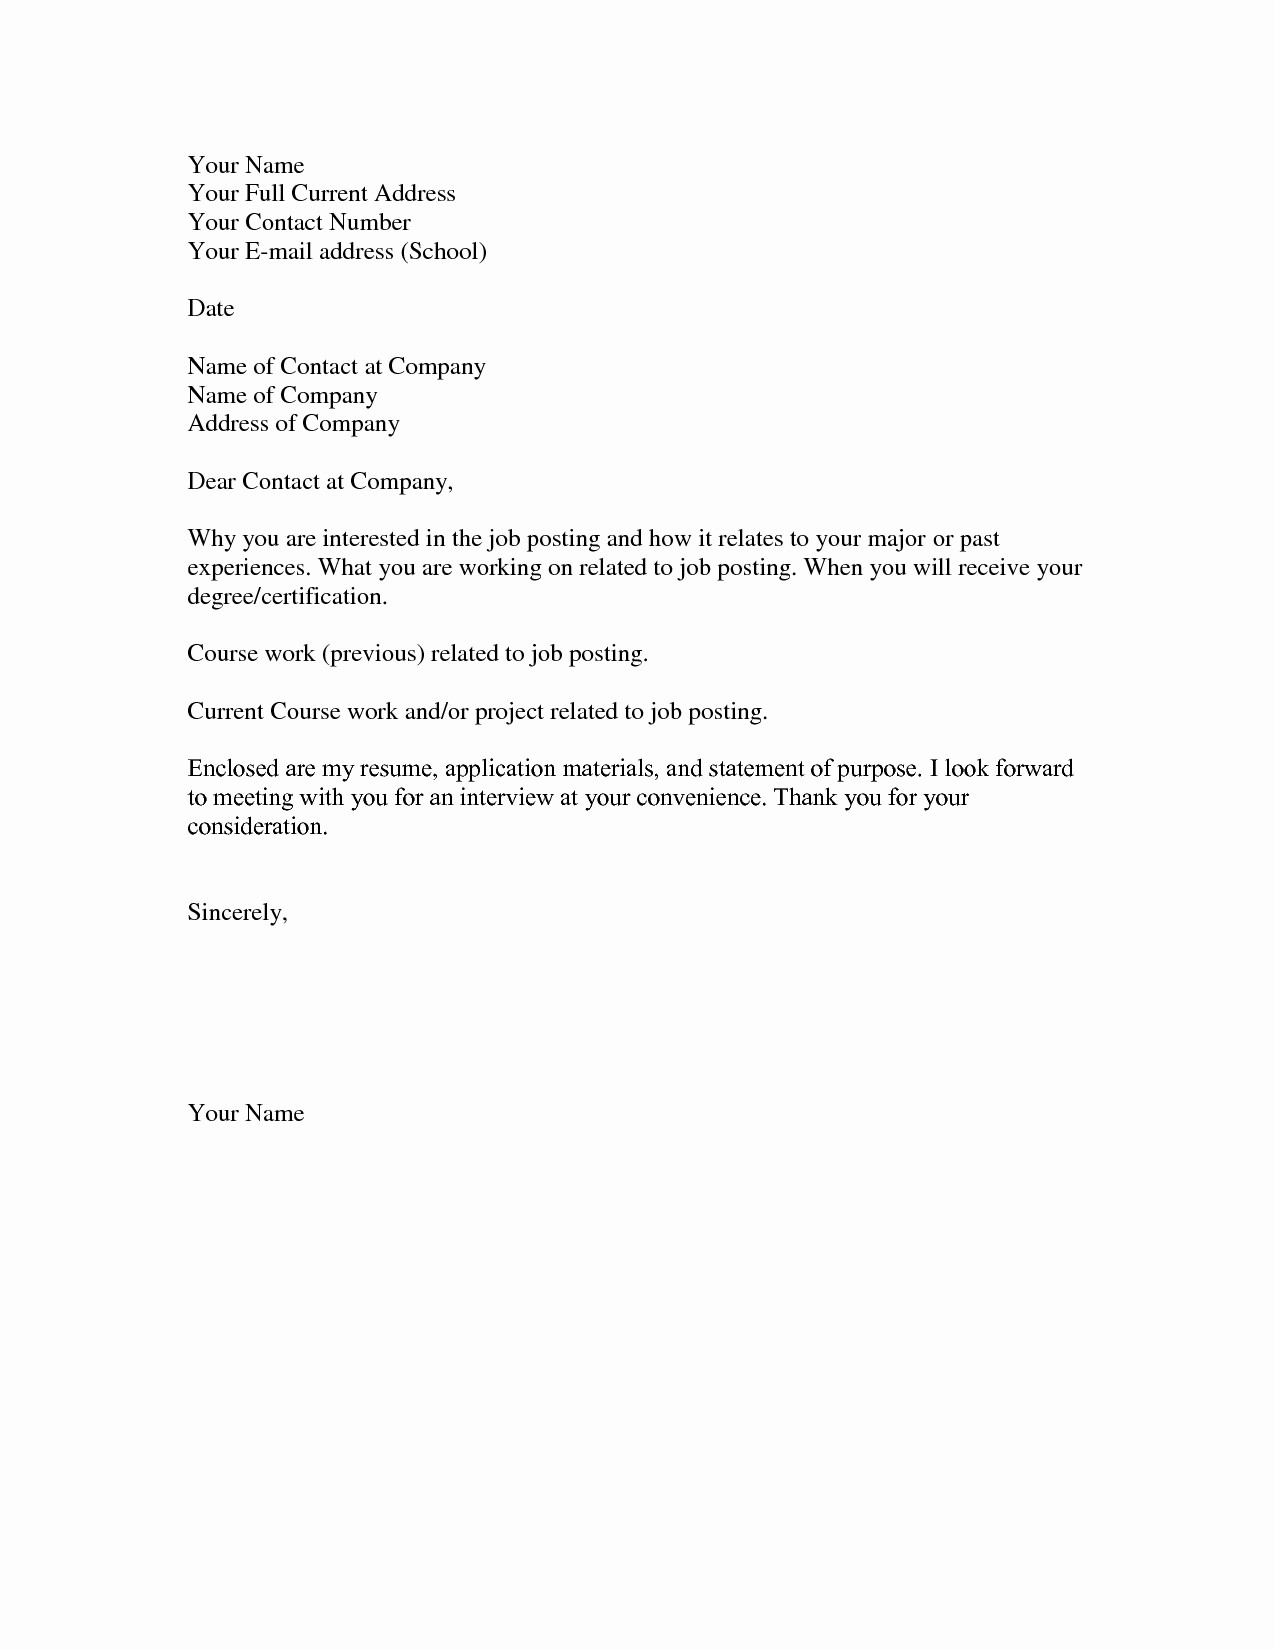 Simple Resume Cover Letter Samples Awesome Basic Cover Letter for A Resume